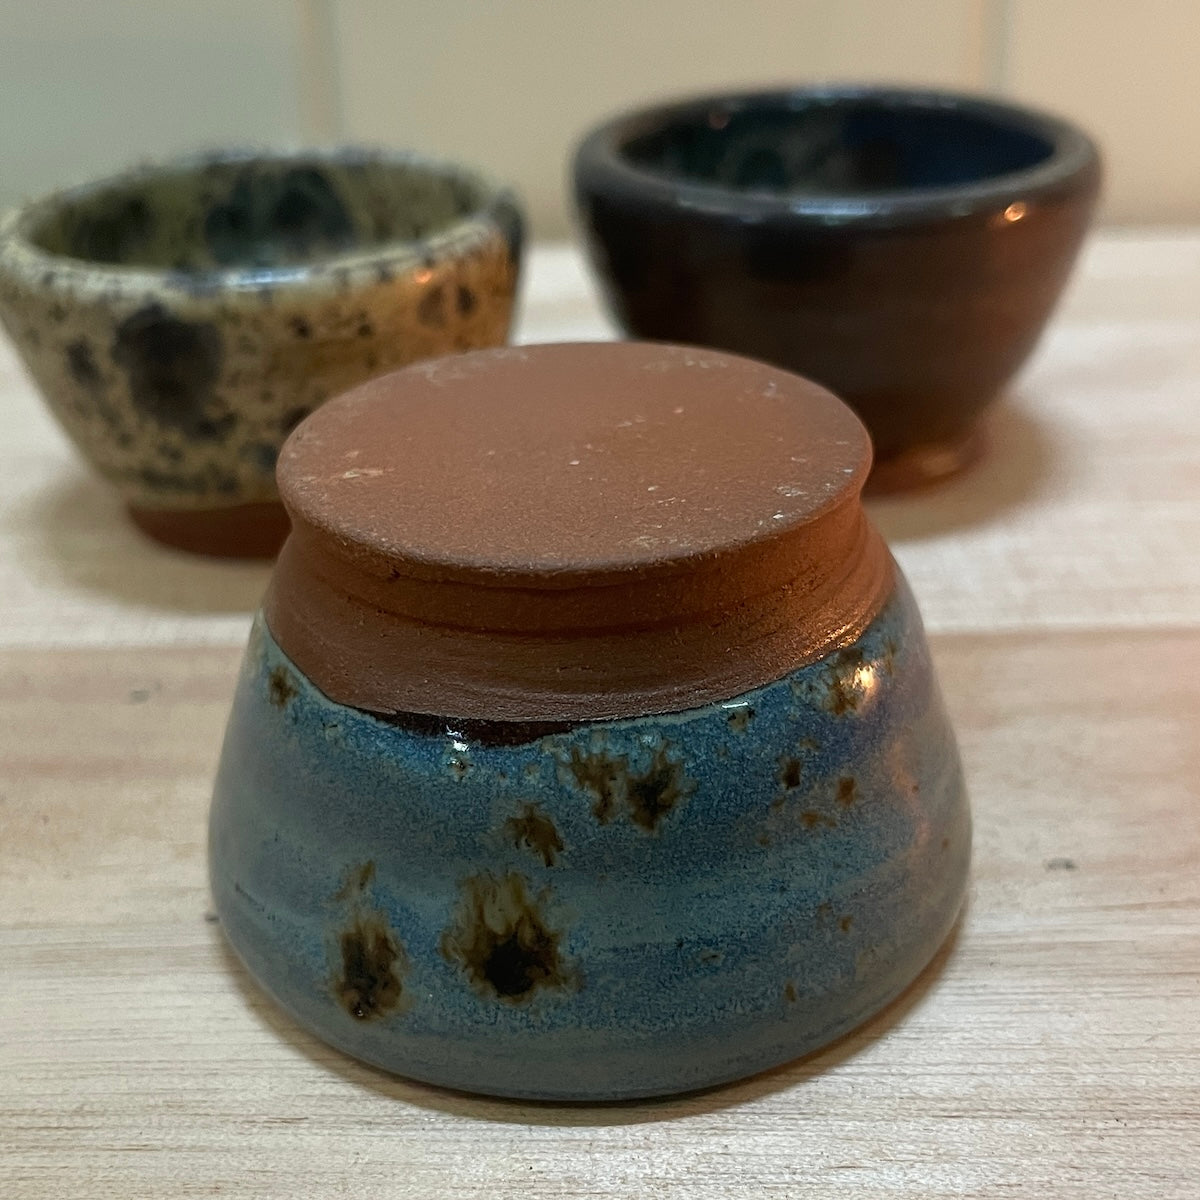 Dark clay base Beeswax ceramic candle holder from Happy Flame